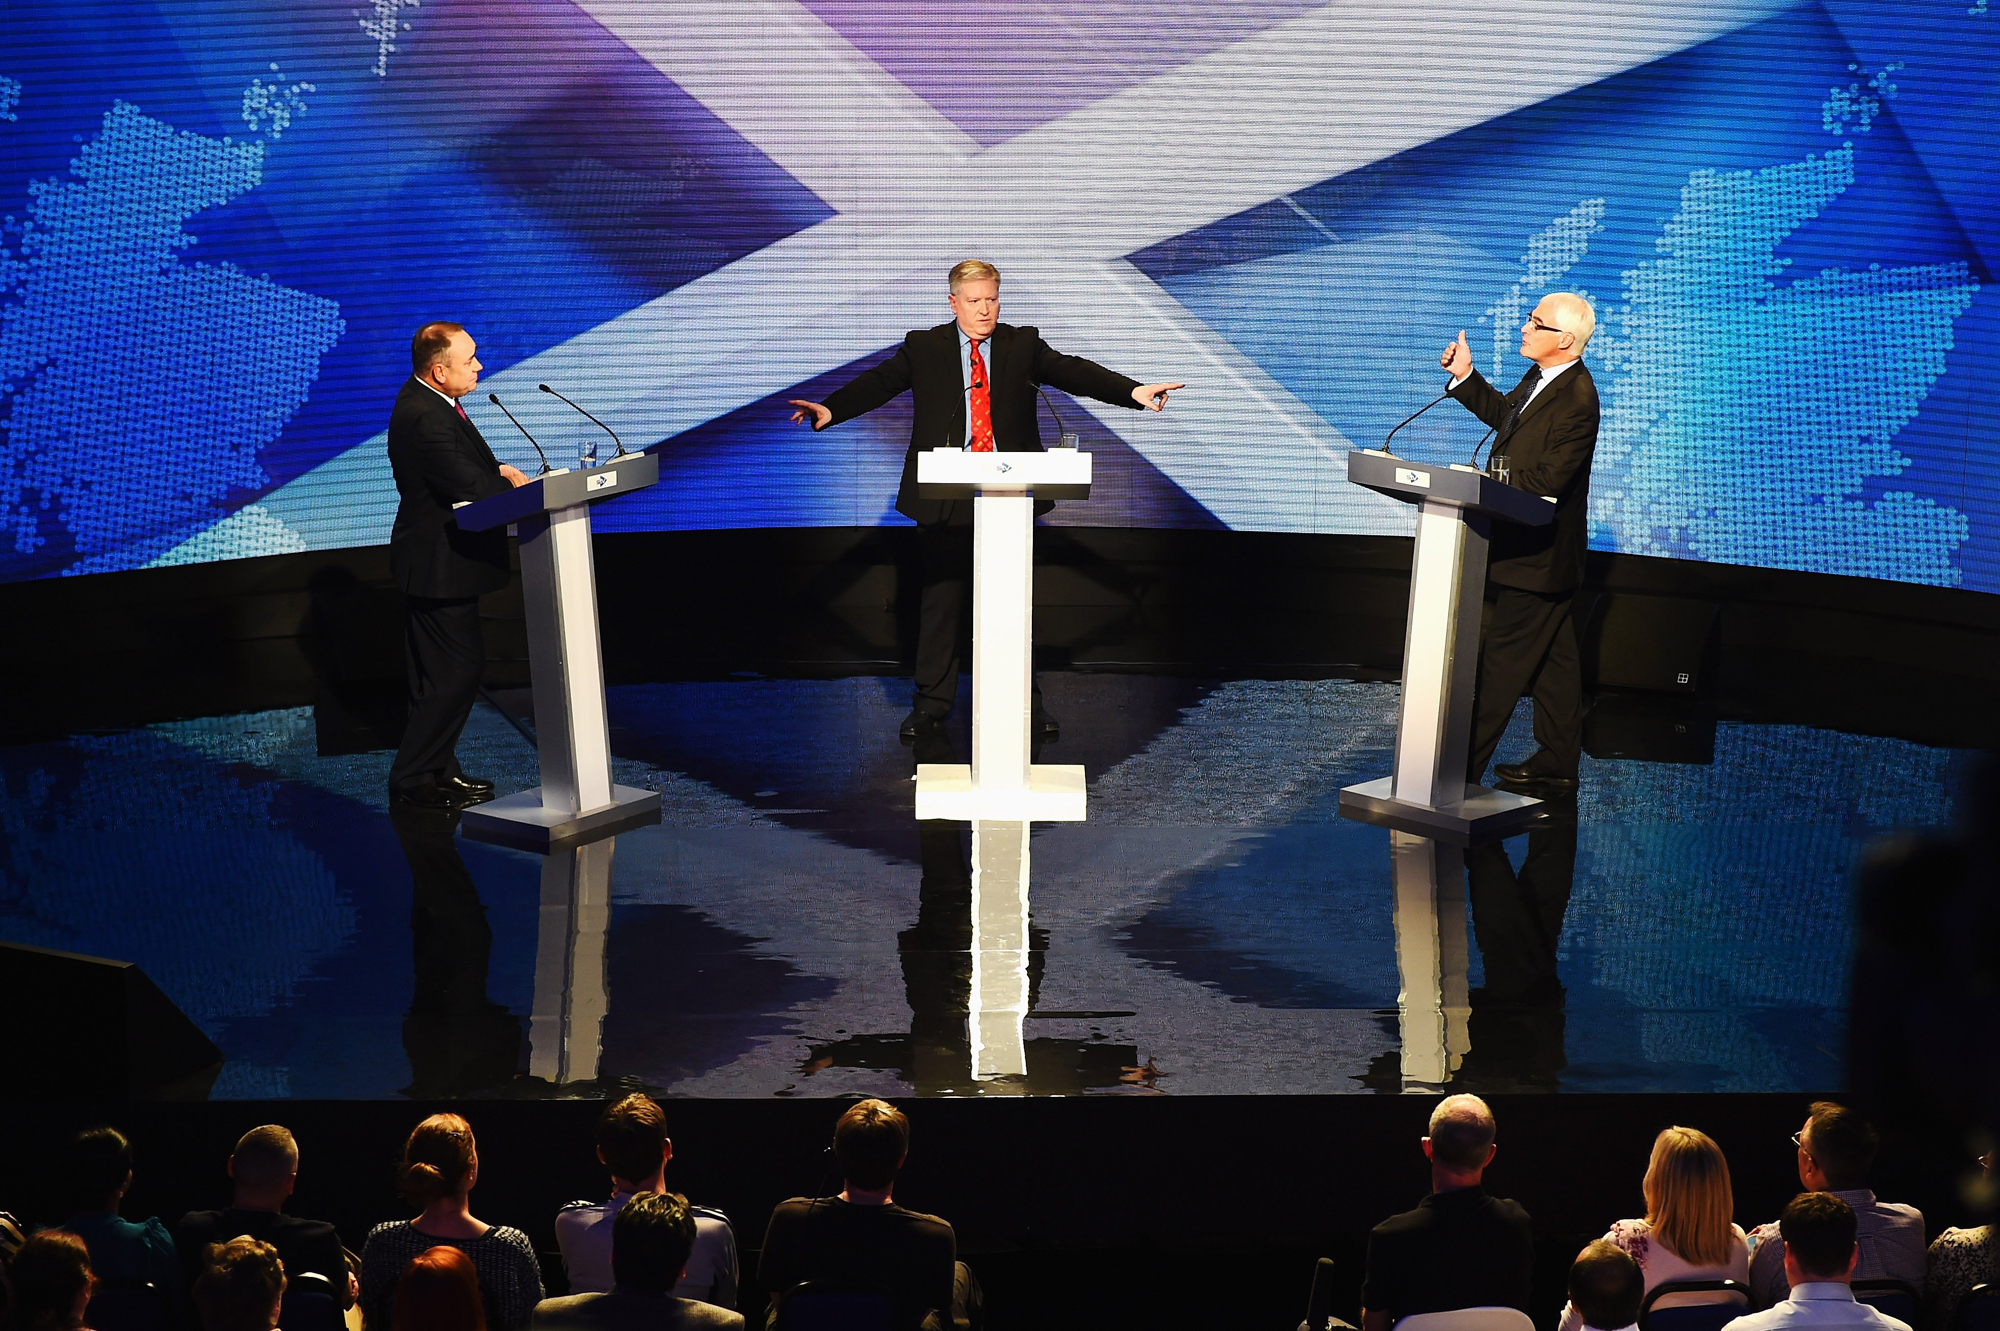 Alex Salmond, First Minister of Scotland and Alistair Darling, chairman of Better Together take part in a live television debate hosted by Bernard Ponsonby at the Royal Conservatoire of Scotland on August 5, 2014 in Glasgow, Scotland.